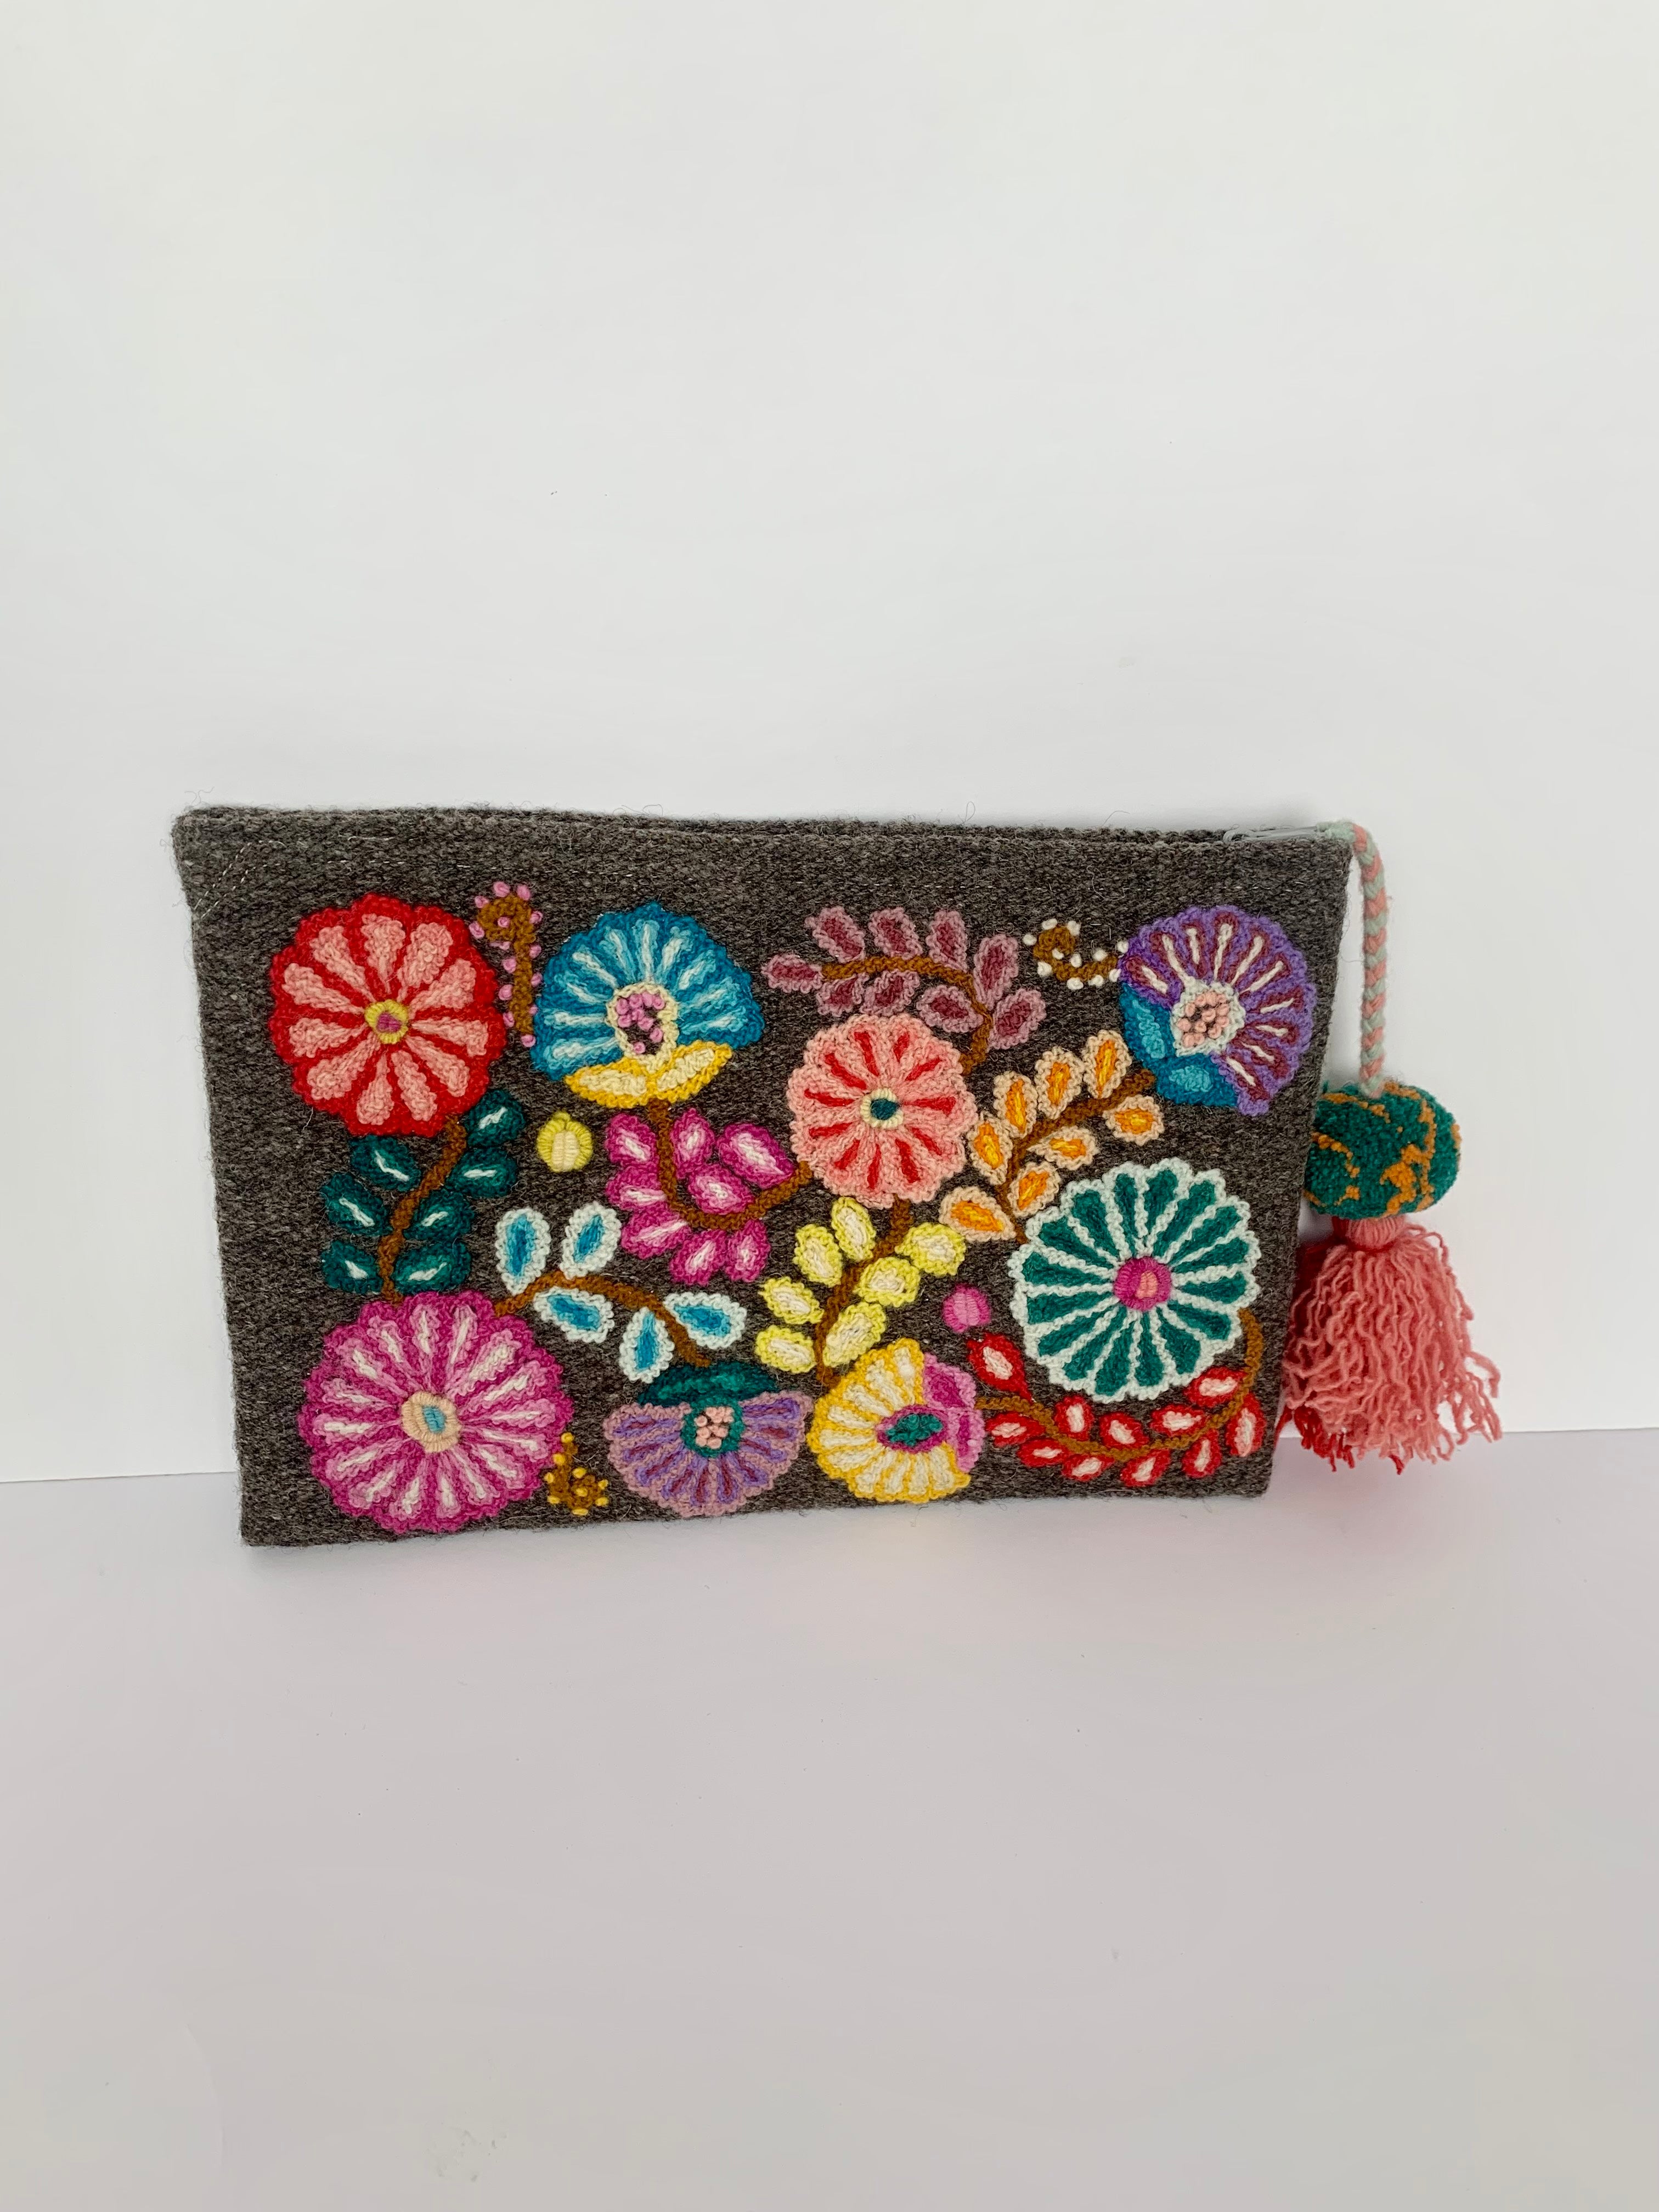 A colorful embroidered bag with tassel and flowers, part of Madeline Parks Designs collection.